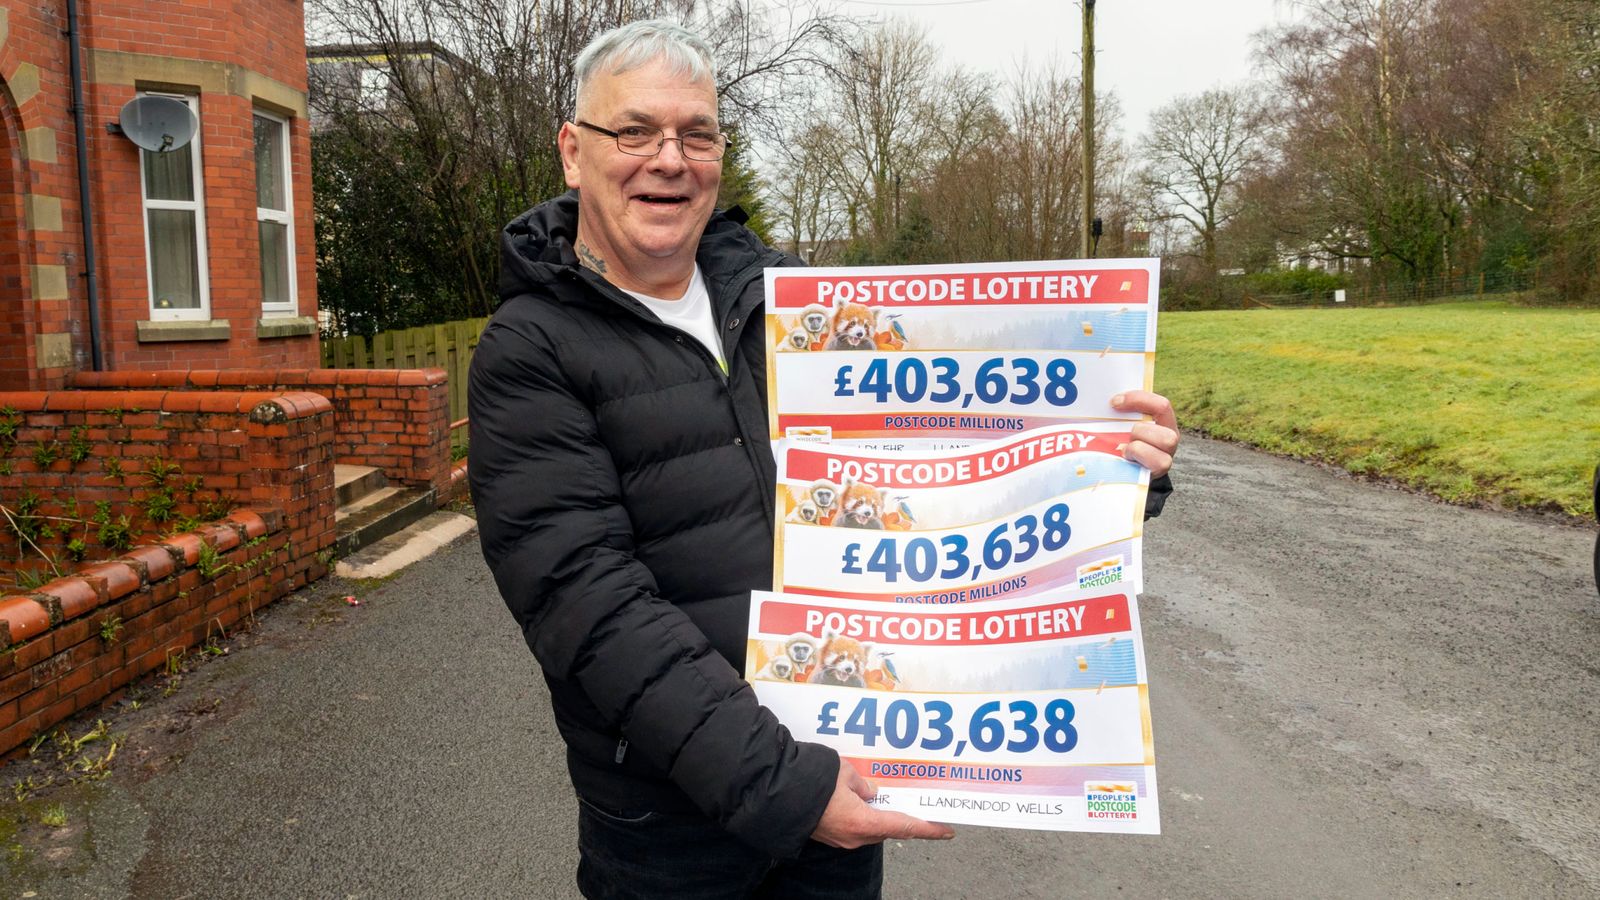 Man who scooped over £1.2m to become biggest Postcode Lottery winner says stepdad 'predicted' it